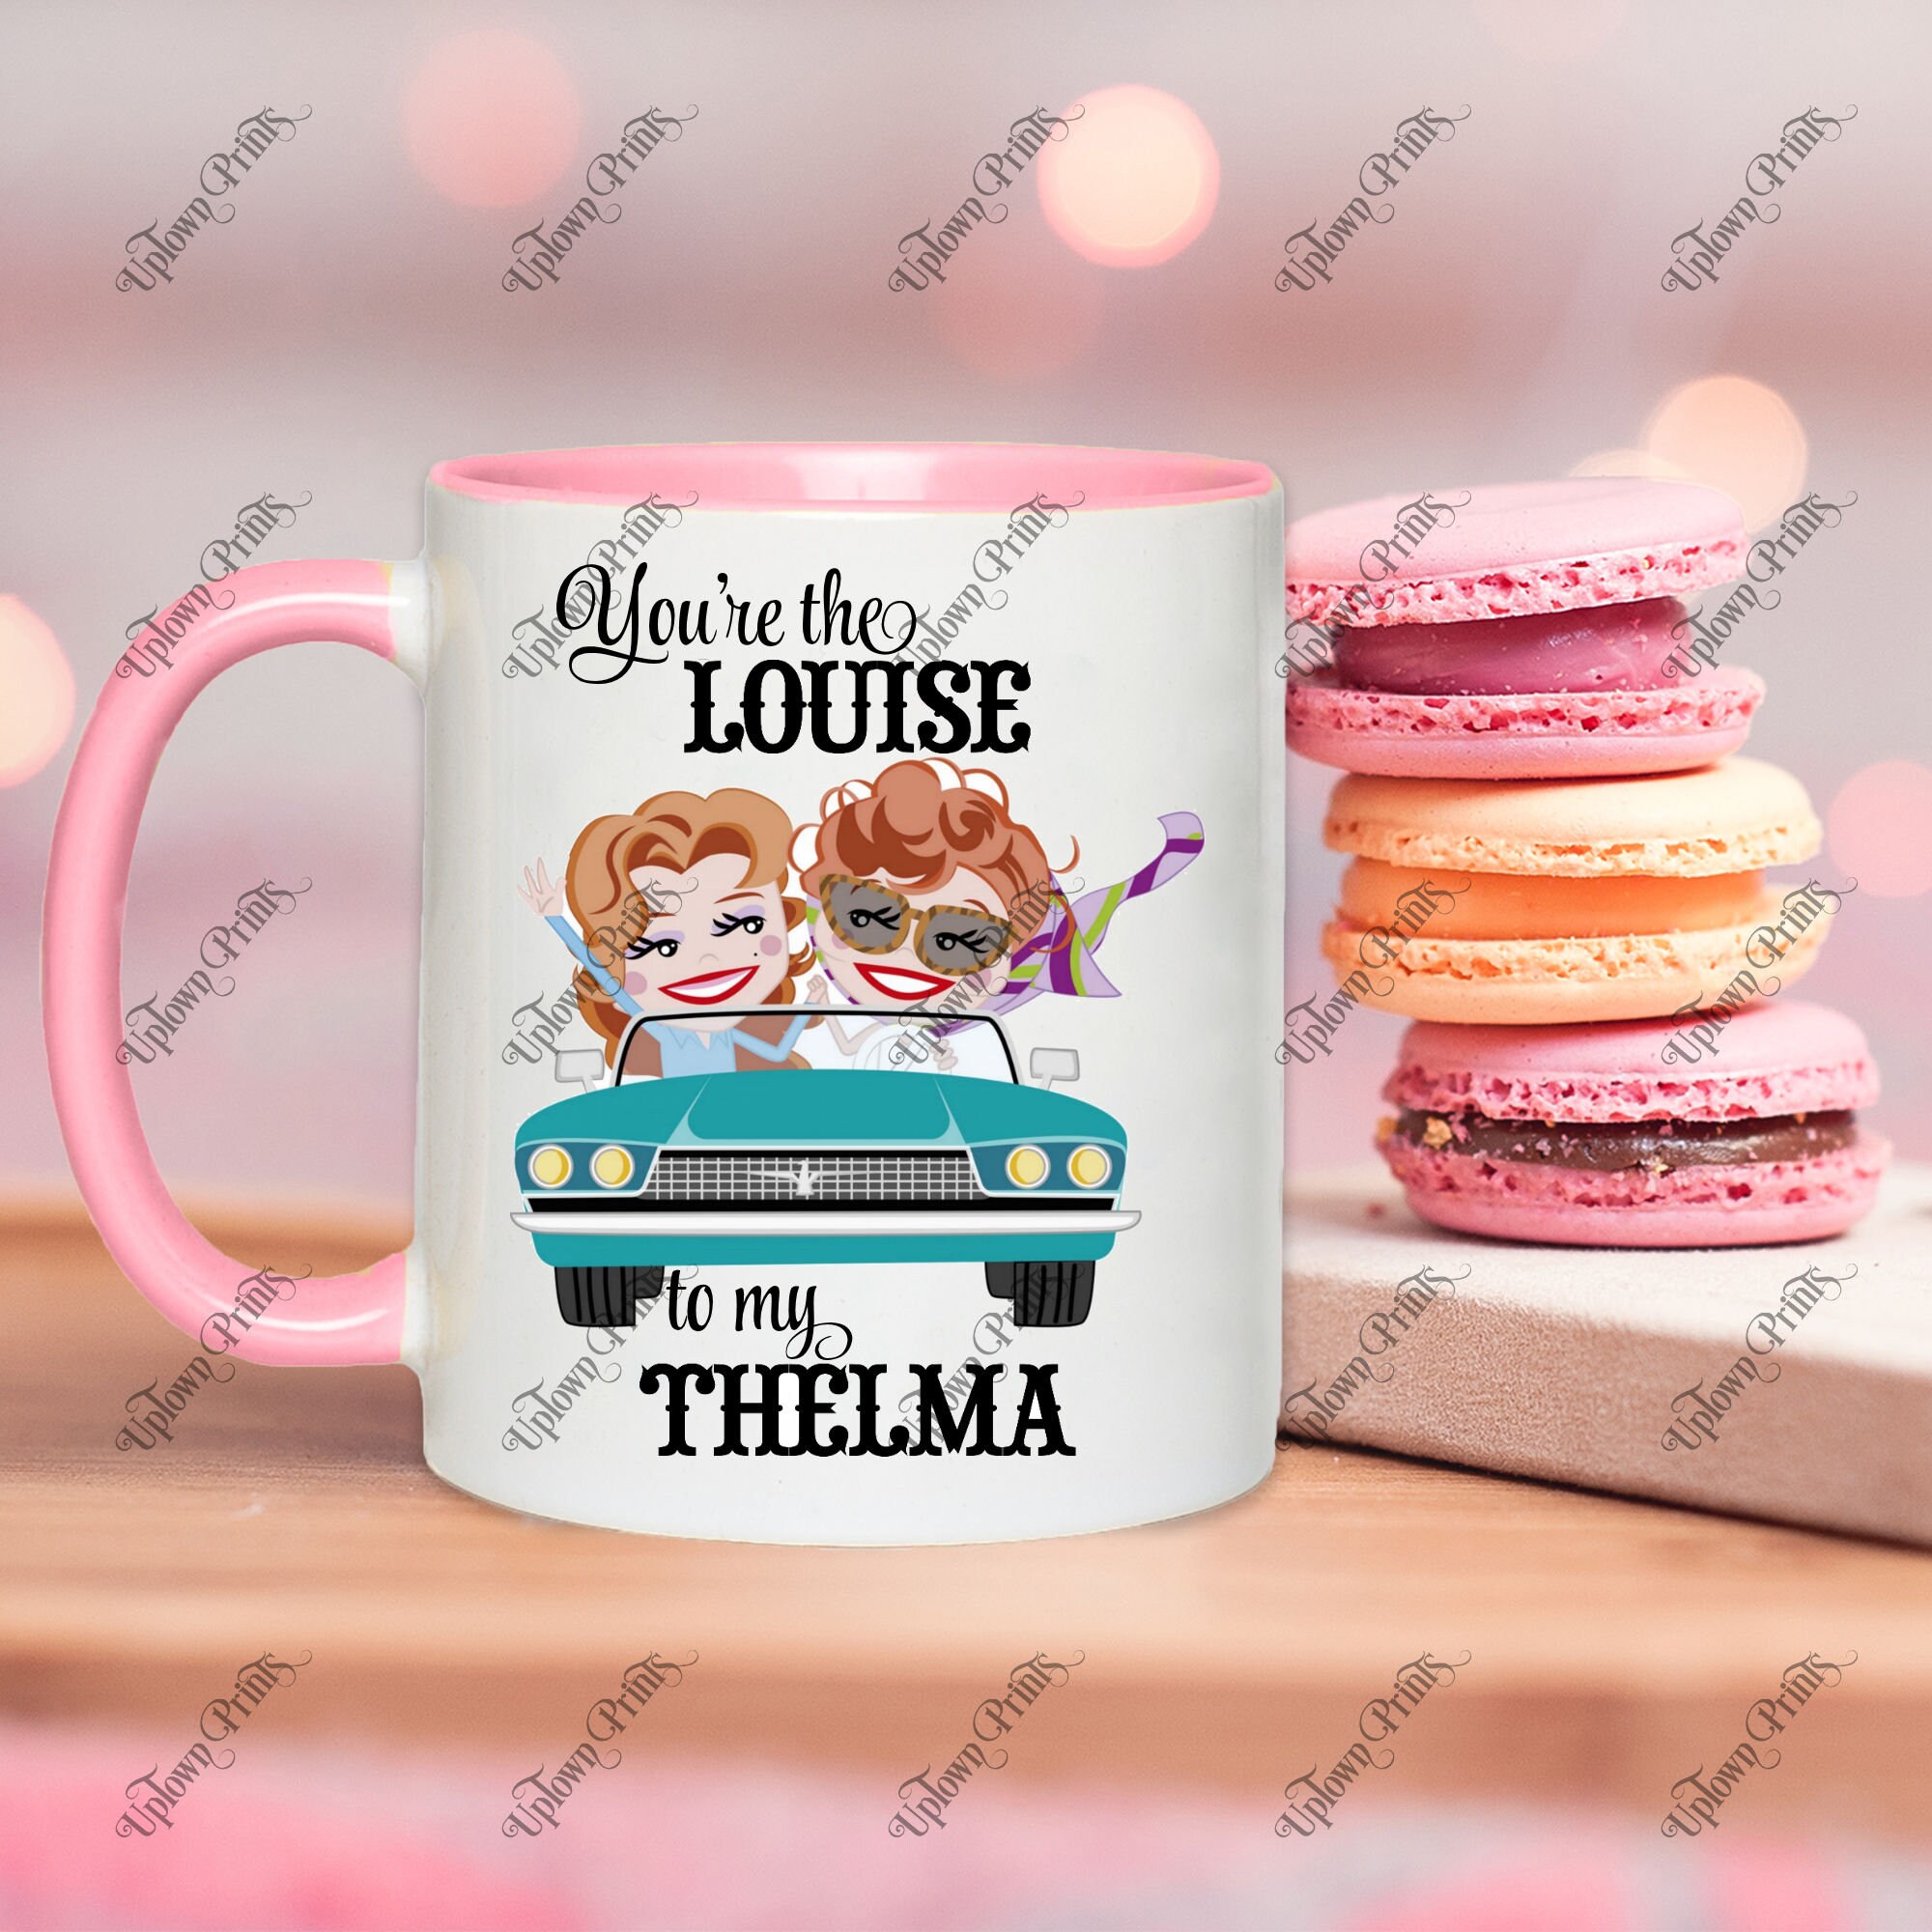 89Customized You are the Thelma to my Louise personalized tumbler - 89  Customized